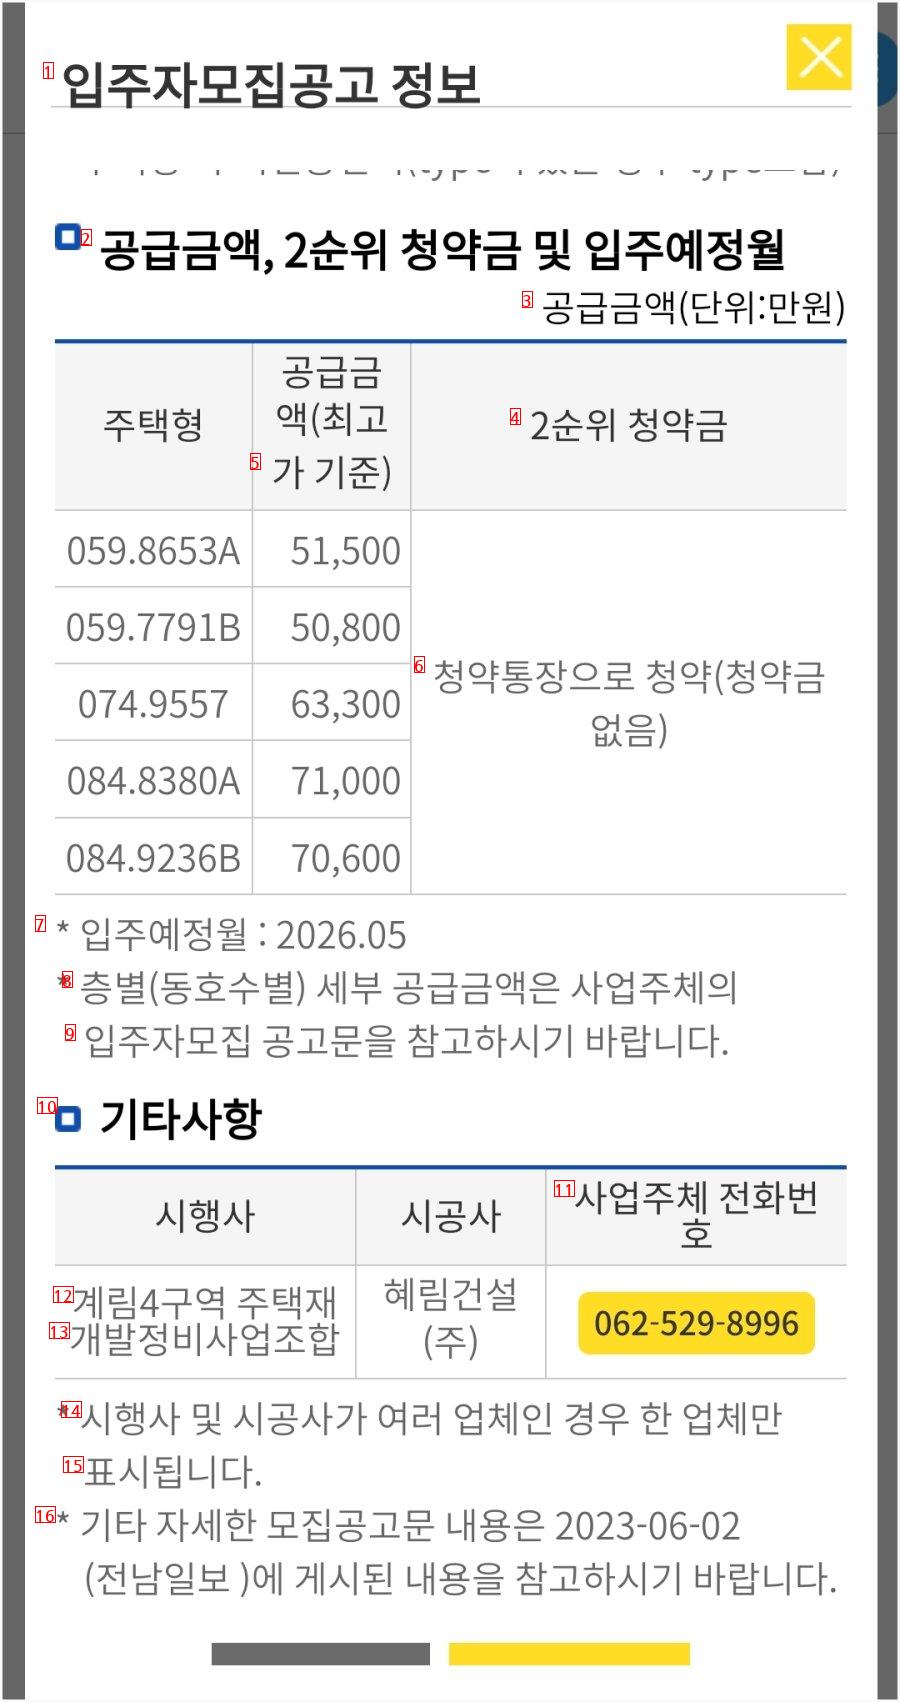 I looked up the apartment price in Gwangju, Jeolla-do, and it's really cold